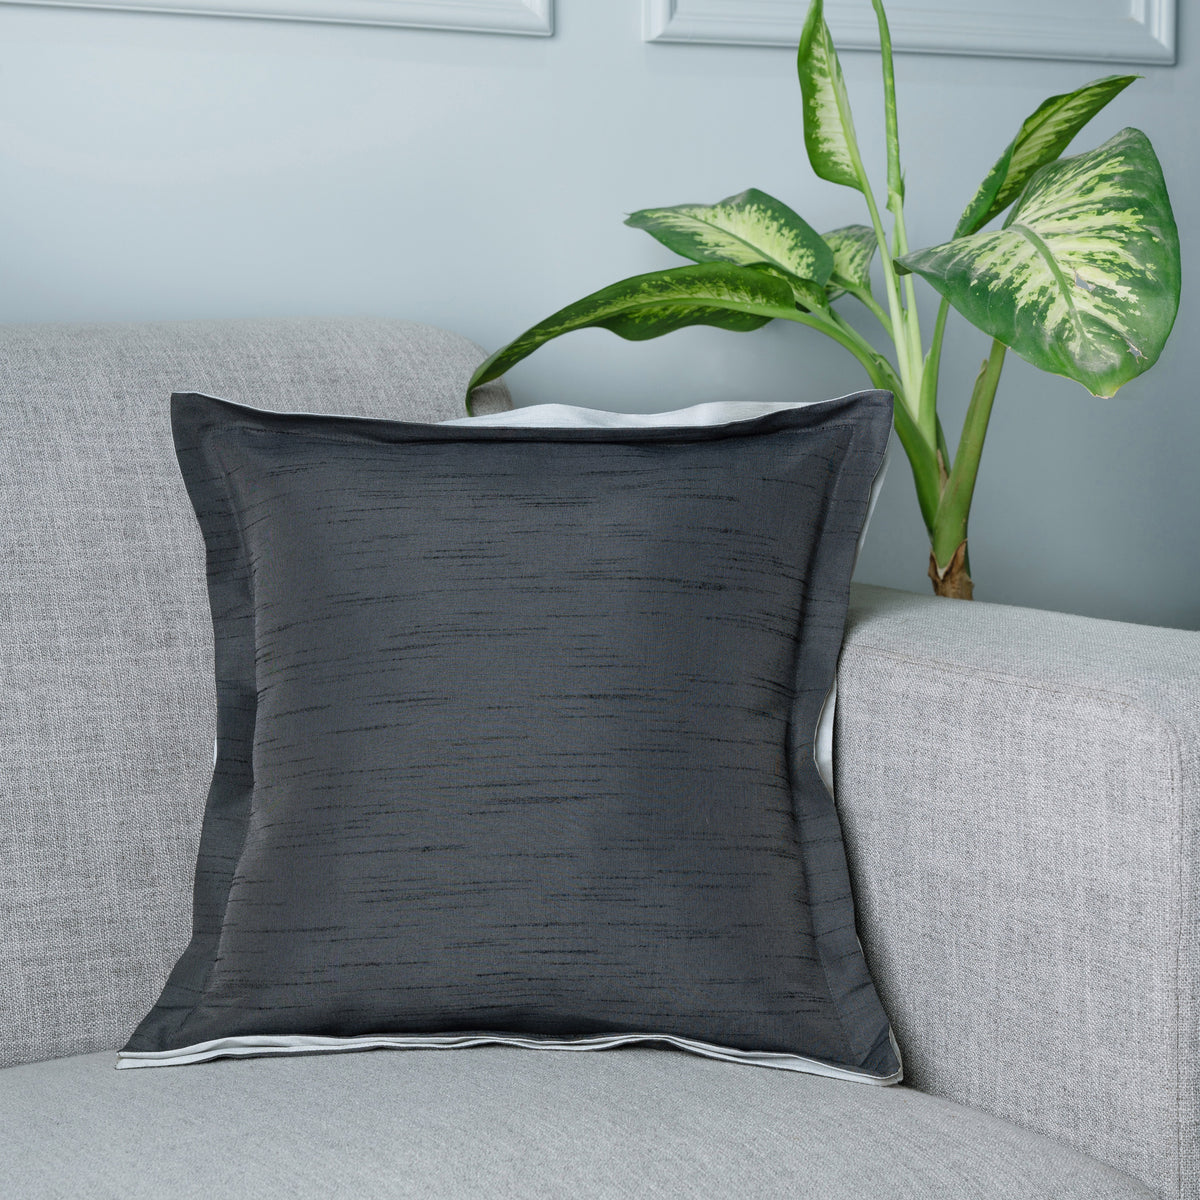 Charcoal Grey Border Design Square Cushion Cover | Set of 4